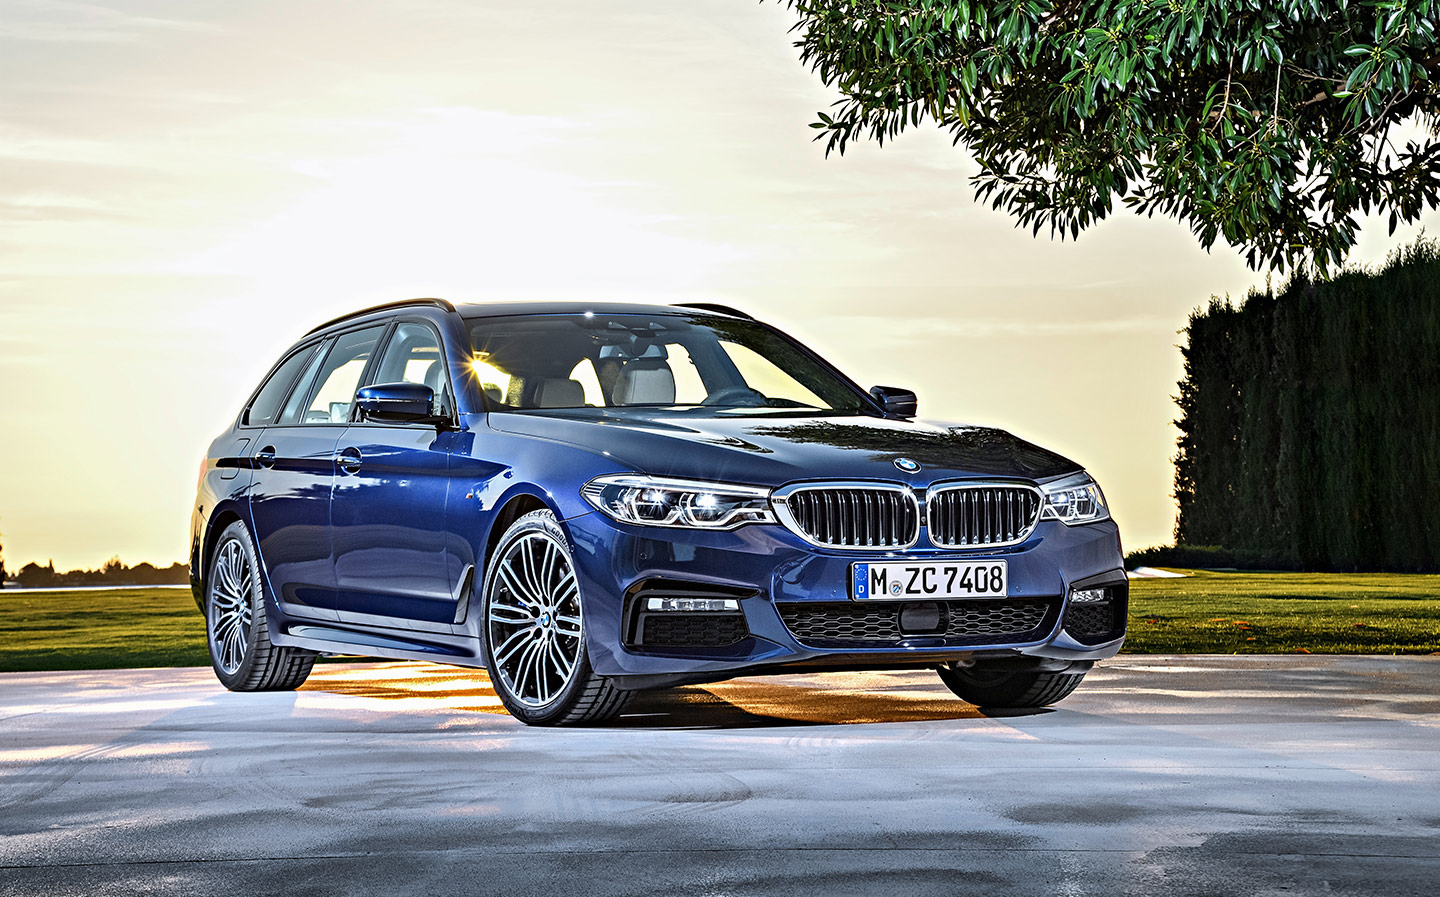 Sunday Times Motor Awards 2018 - best family car nominees - BMW 5-Series Touring